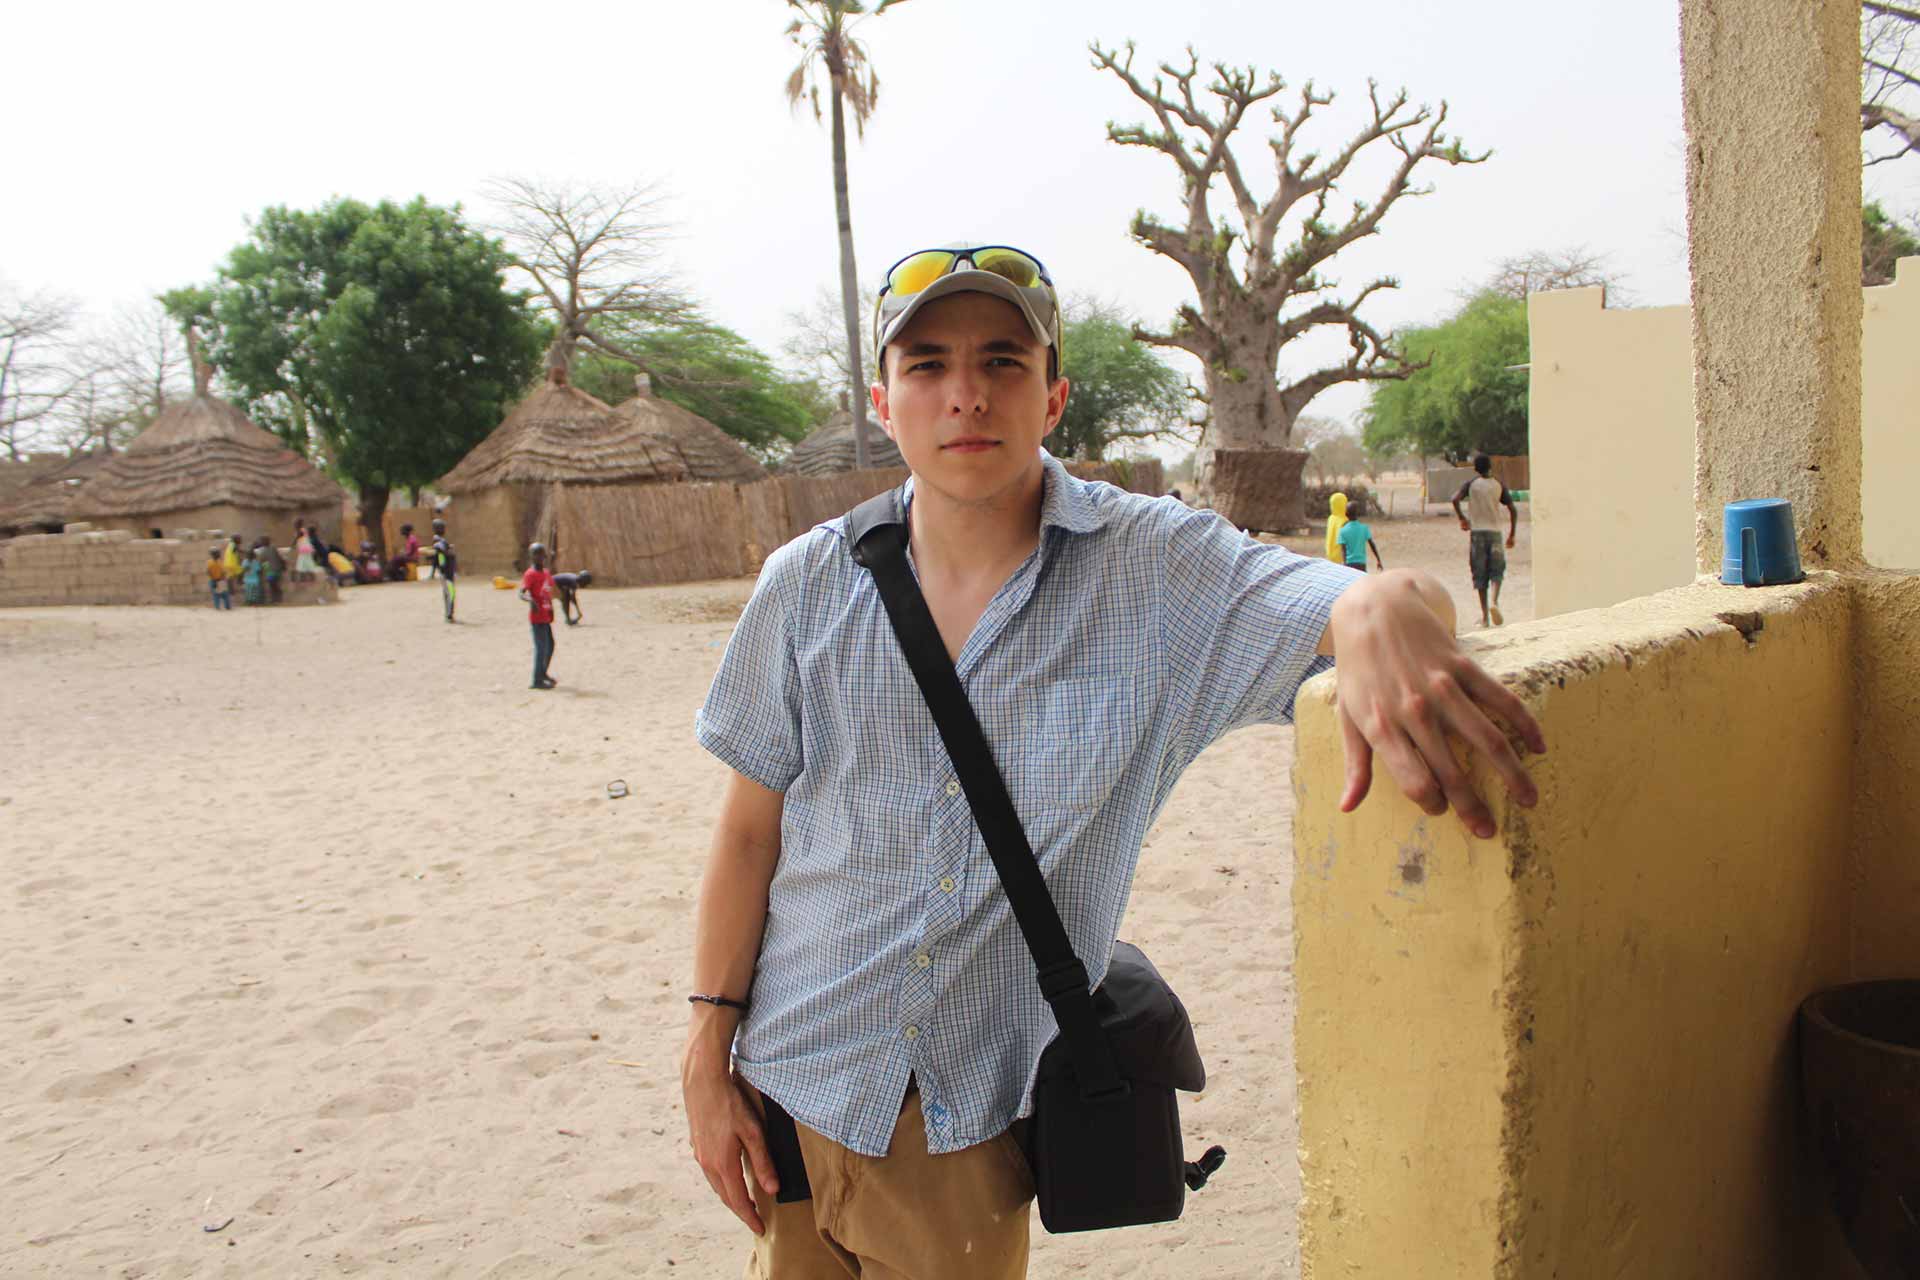 Houghton alumnus Jacob Kuhlkin standing by building when traveling abroad.